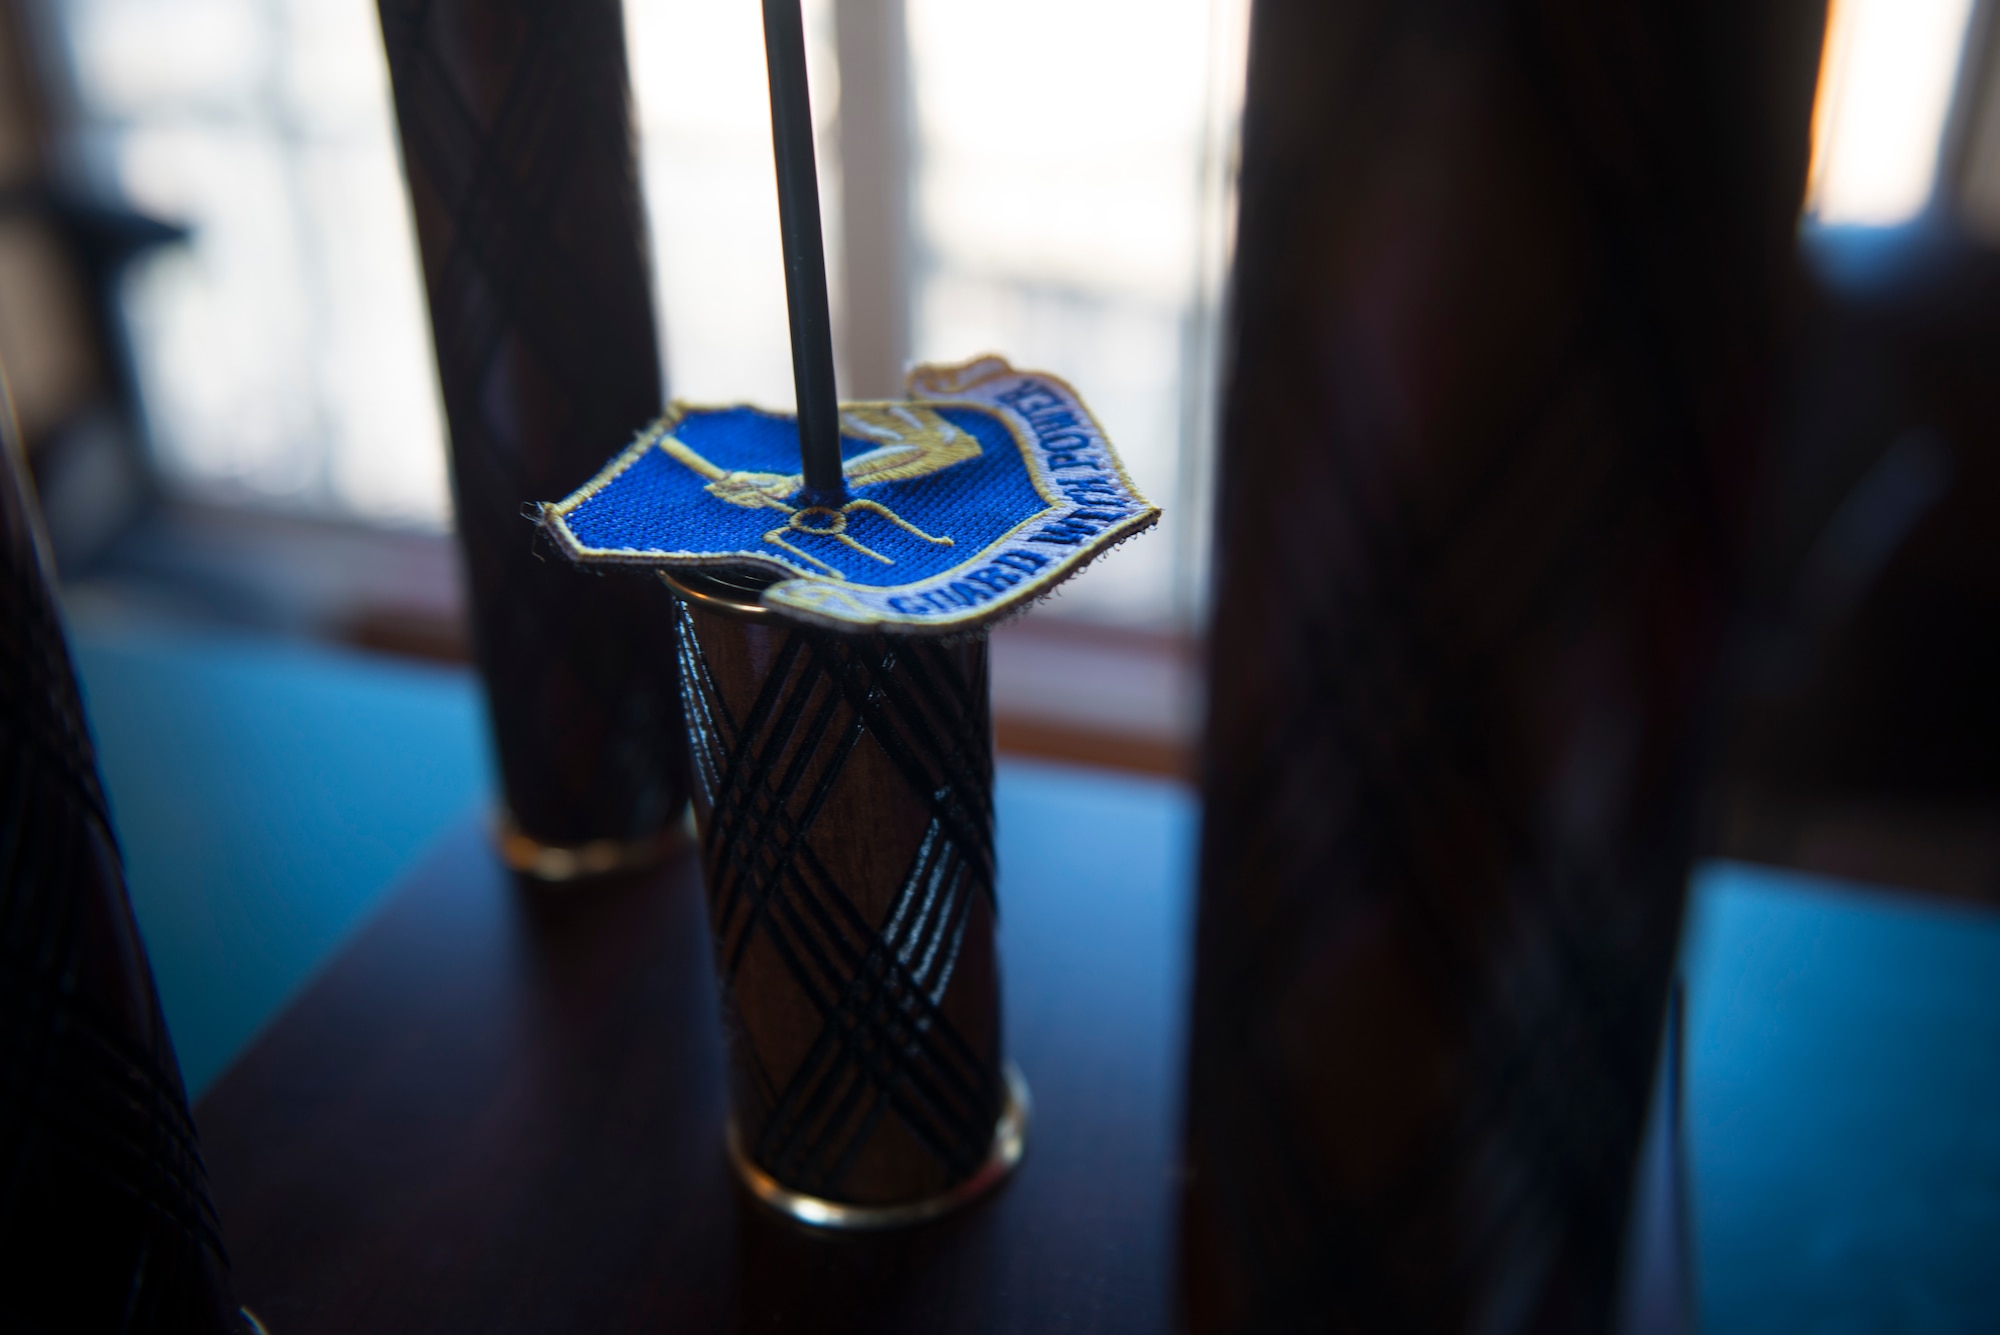 The 25th Attack Group unit patch is pierced by the trophy spear following a friendly shootout at the Skeet and Trap Range, Shaw Air Force Base S.C., Jan 25.